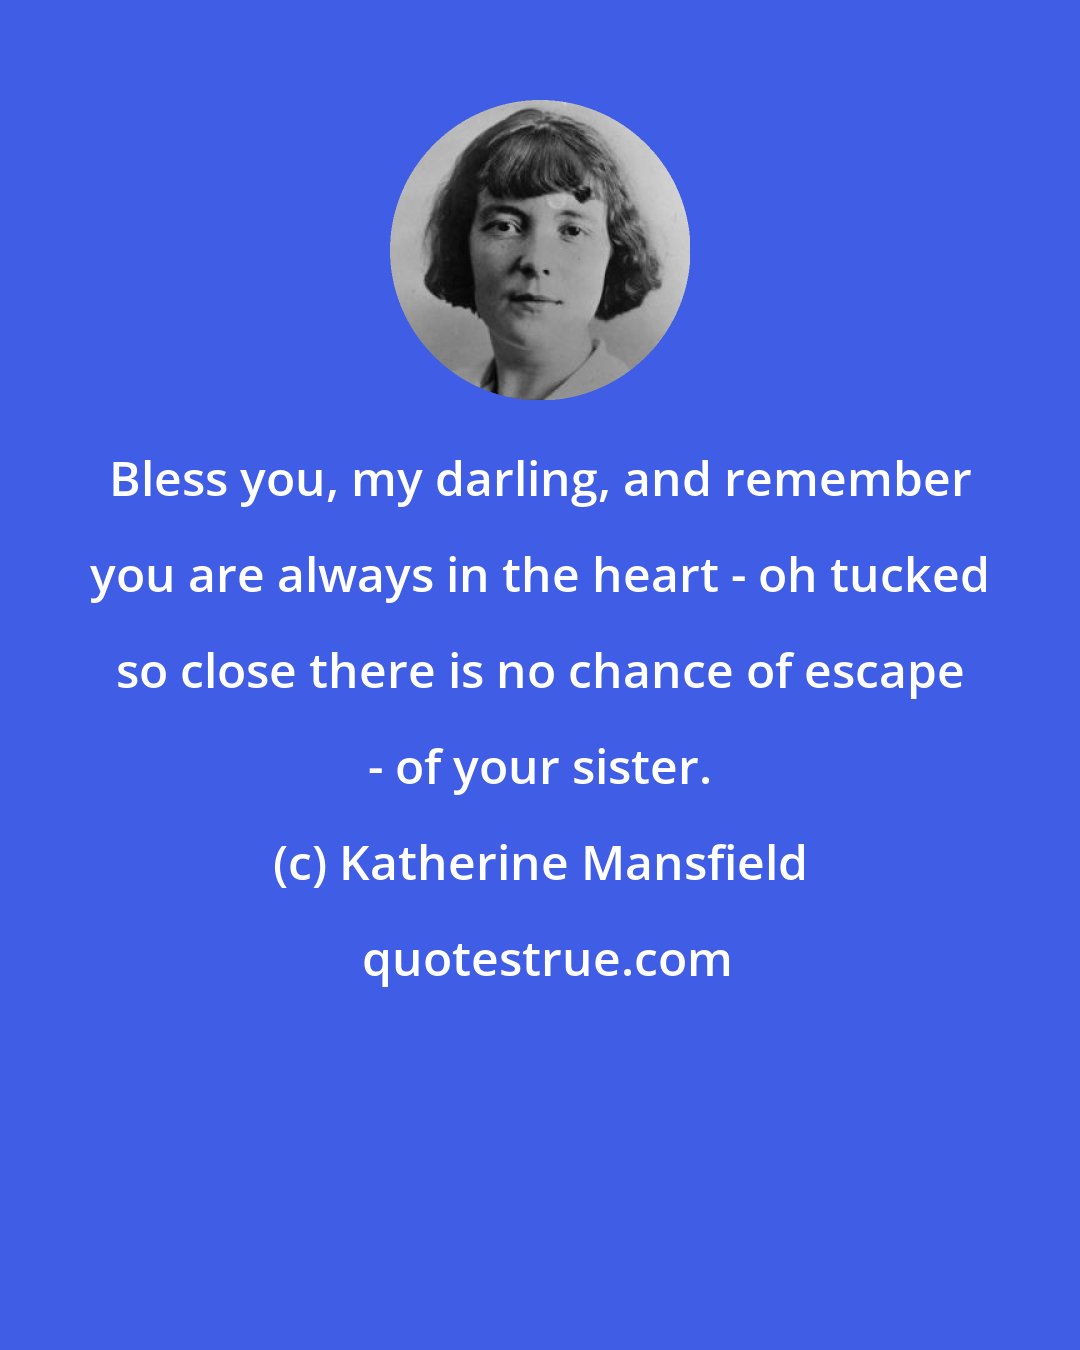 Katherine Mansfield: Bless you, my darling, and remember you are always in the heart - oh tucked so close there is no chance of escape - of your sister.